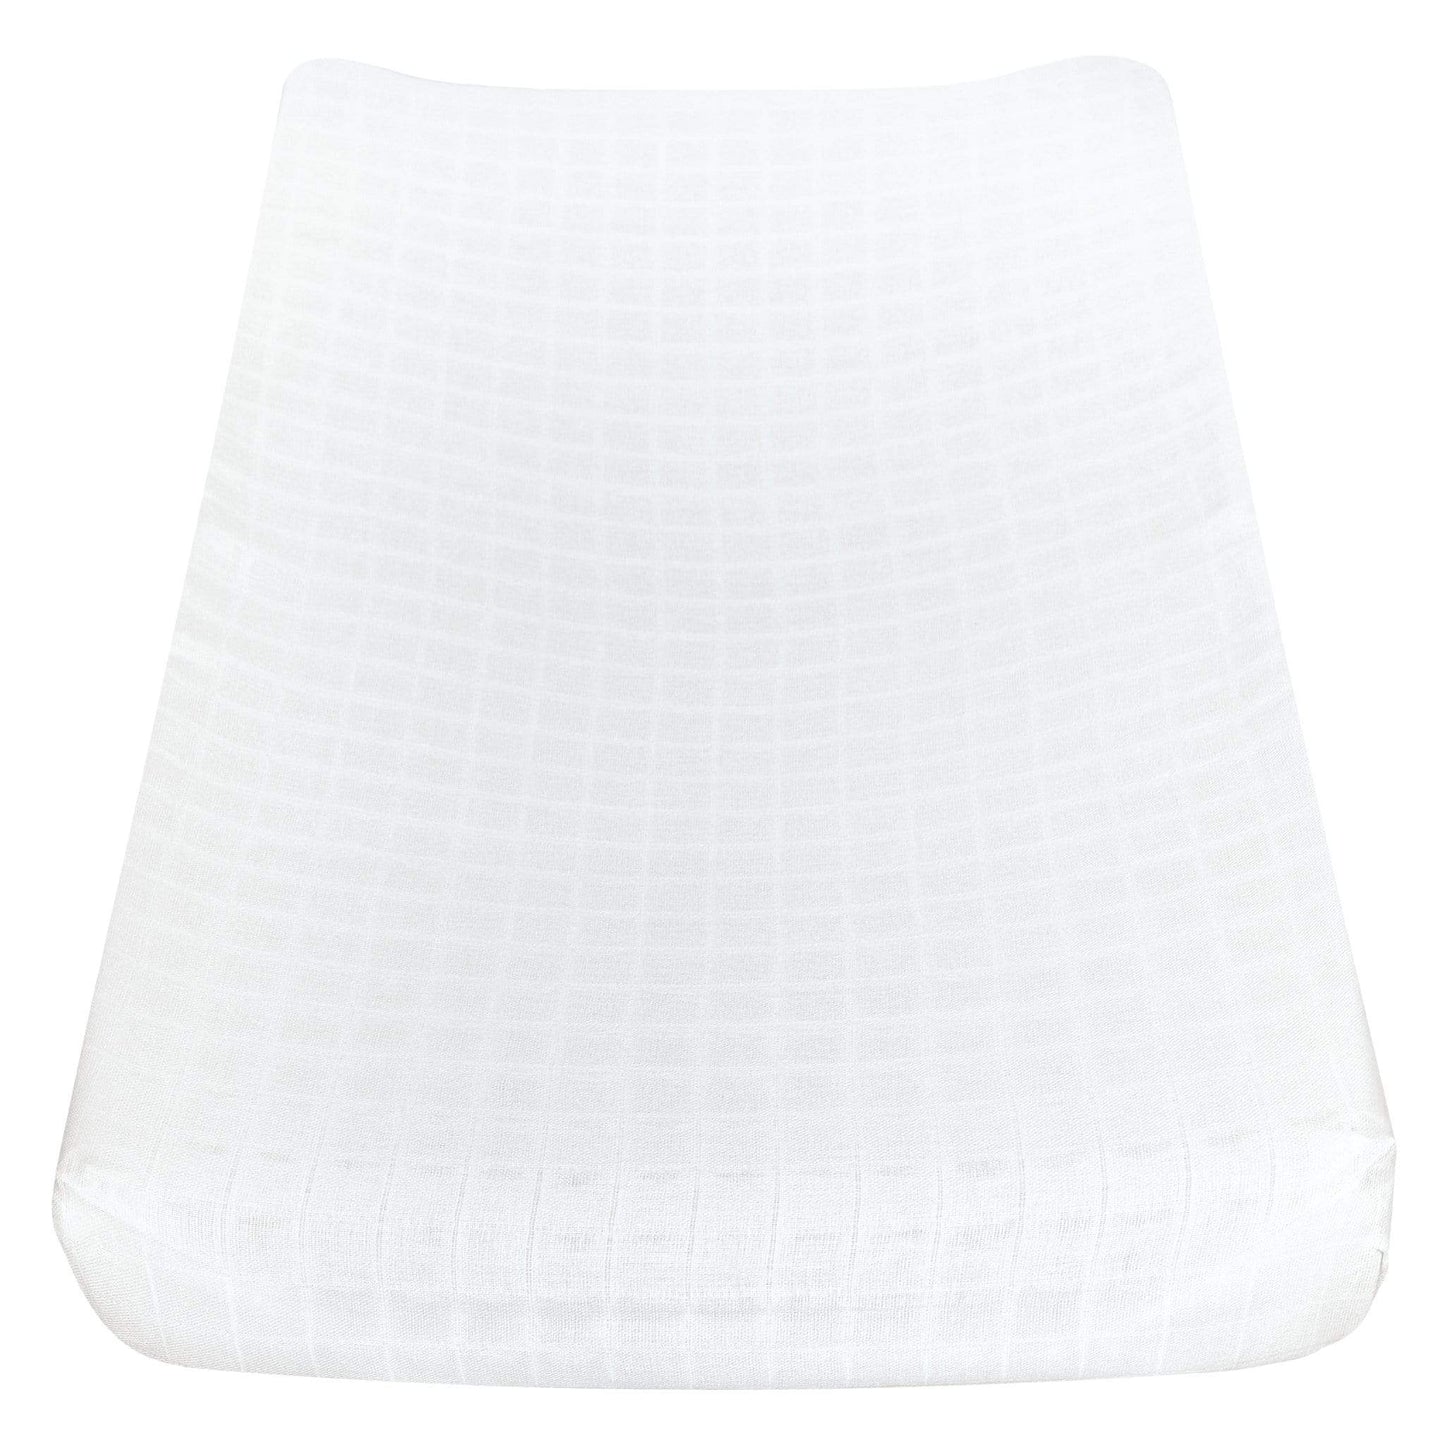 Cotton muslin change pad cover - white